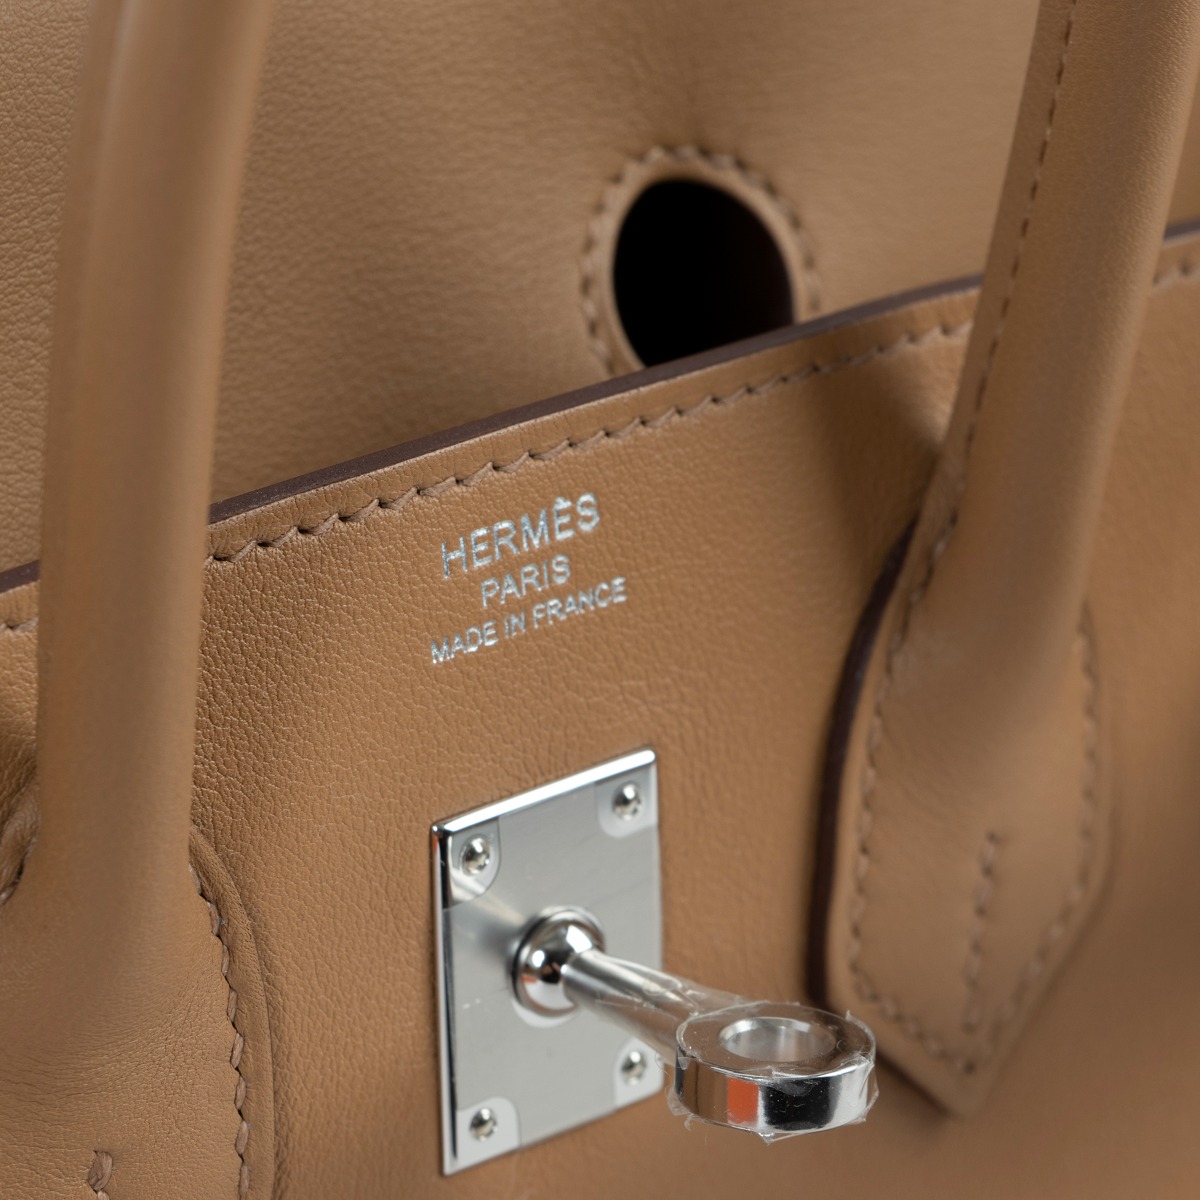 A LIMITED EDITION BISCUIT SWIFT LEATHER IN & OUT BIRKIN 25 WITH PALLADIUM  HARDWARE, HERMÈS, 2021